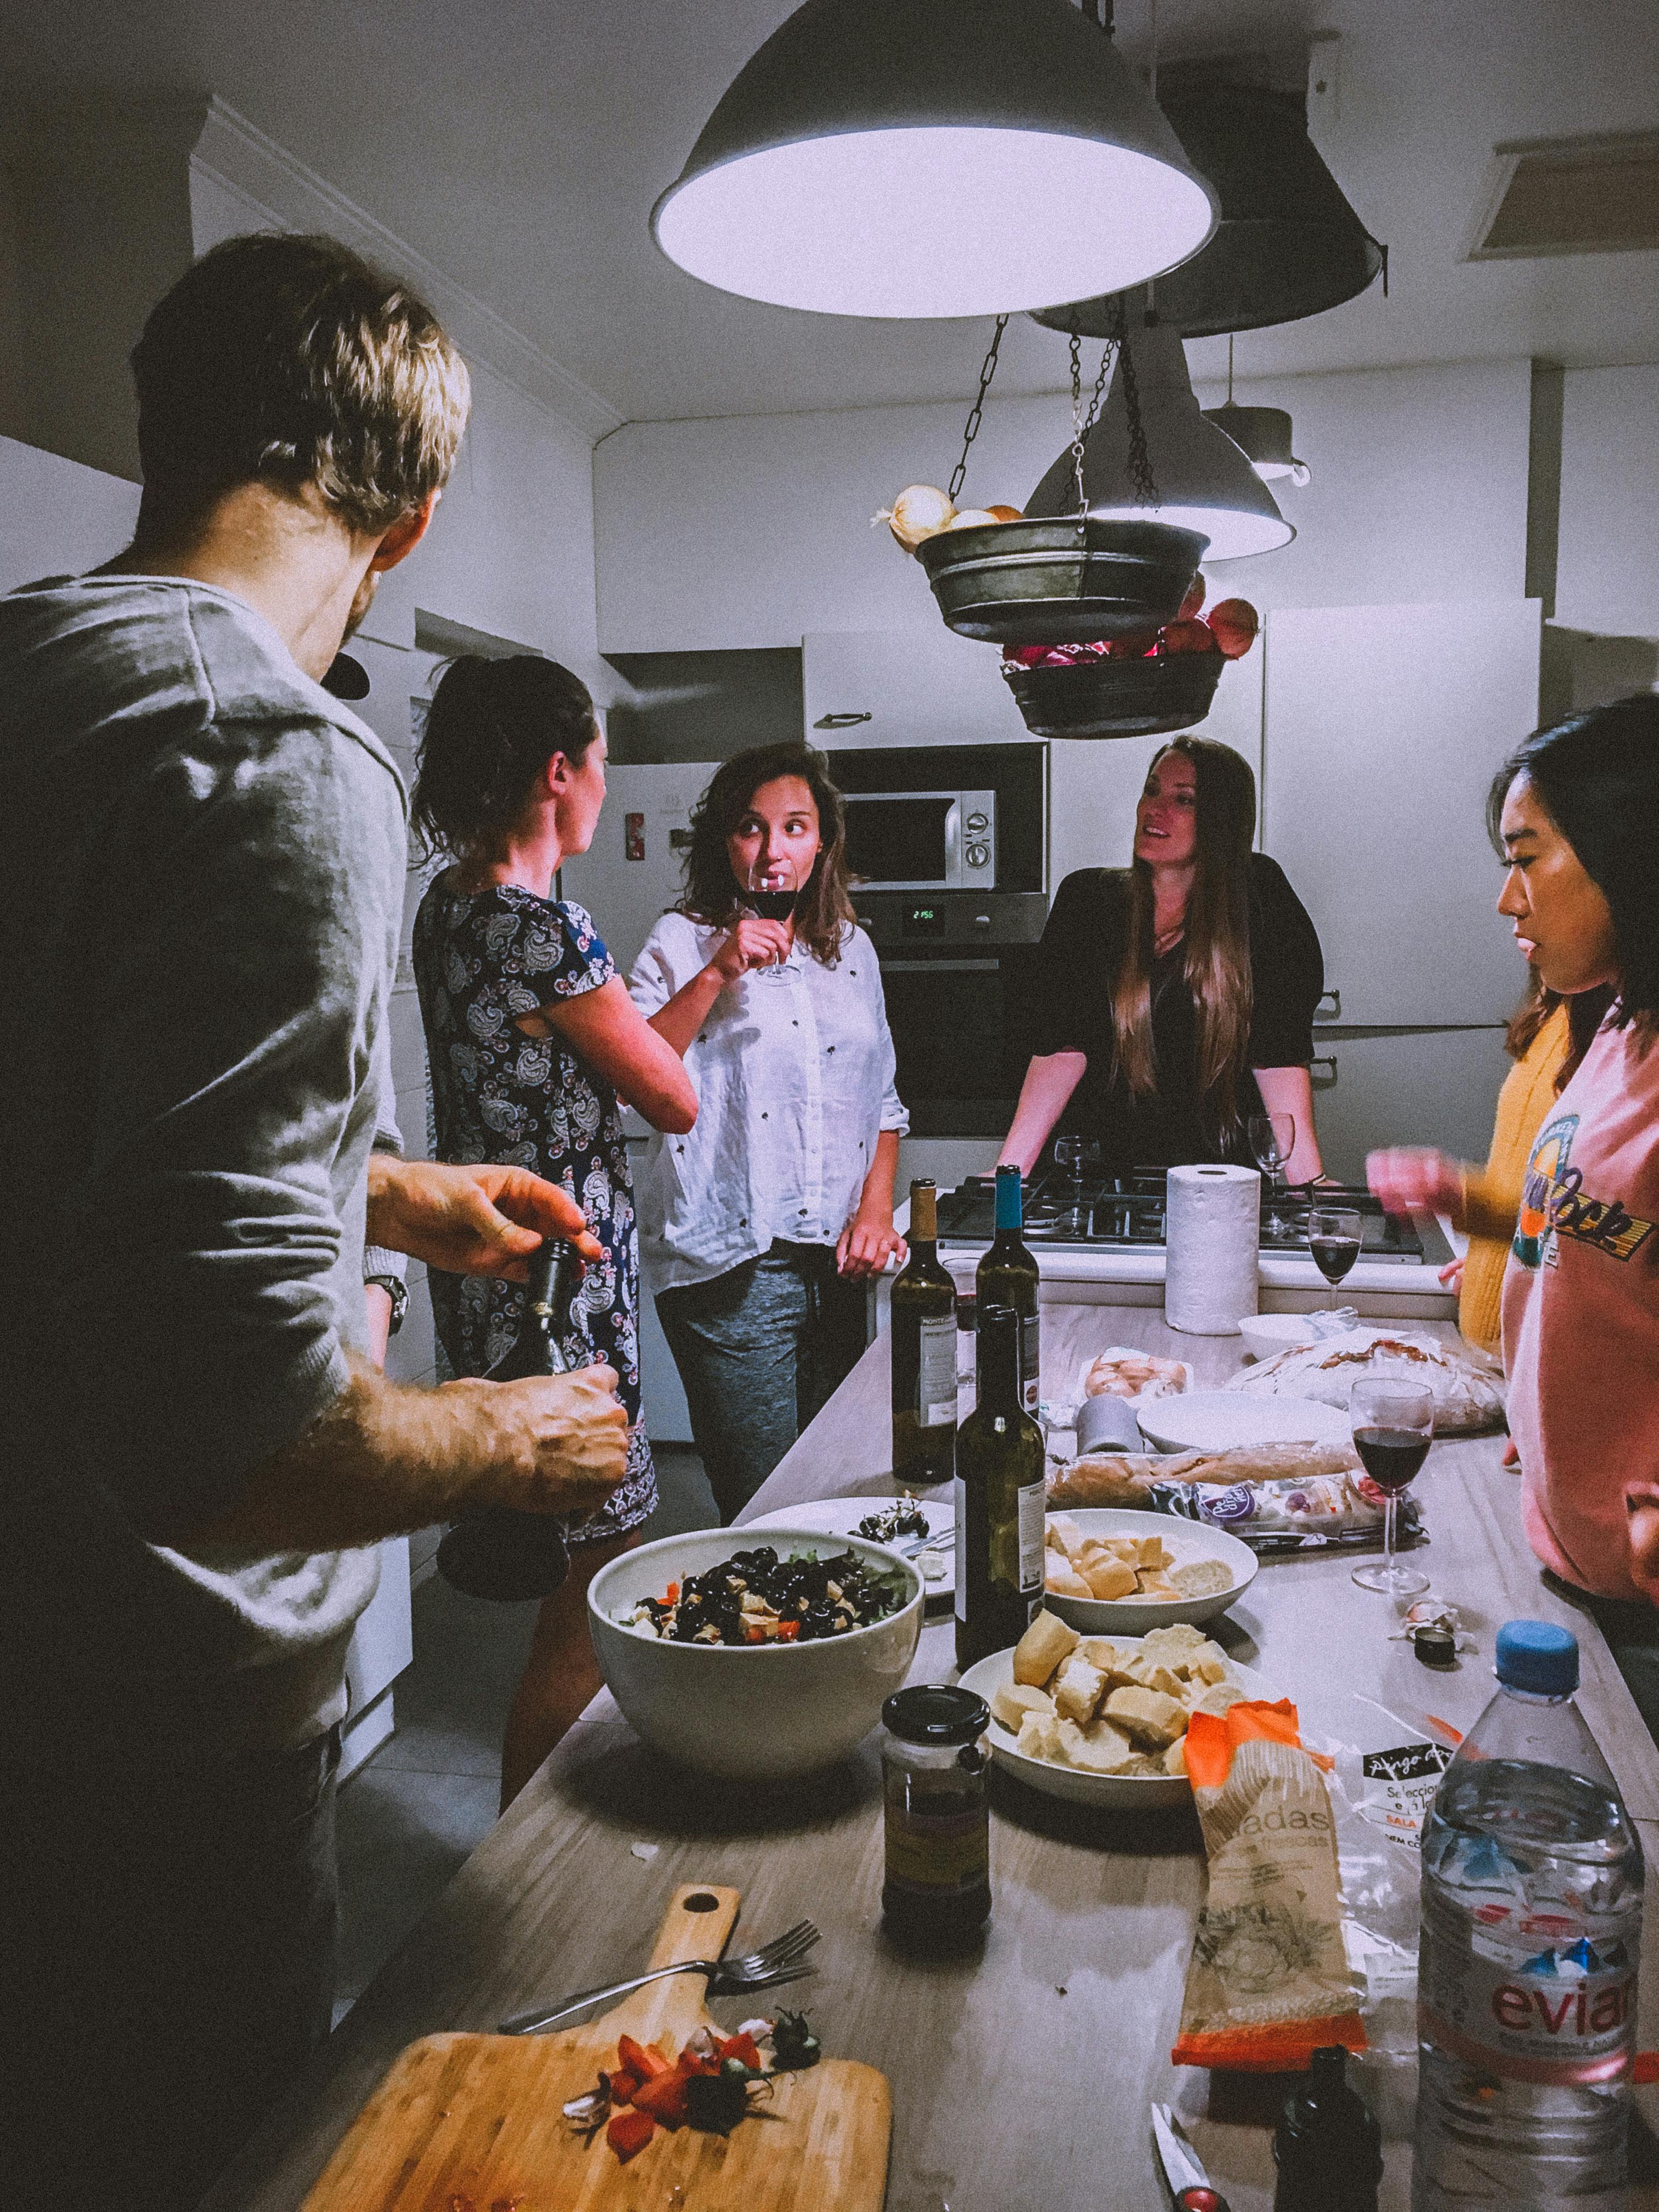 A group of friends sharing a meal | Source: Pexels